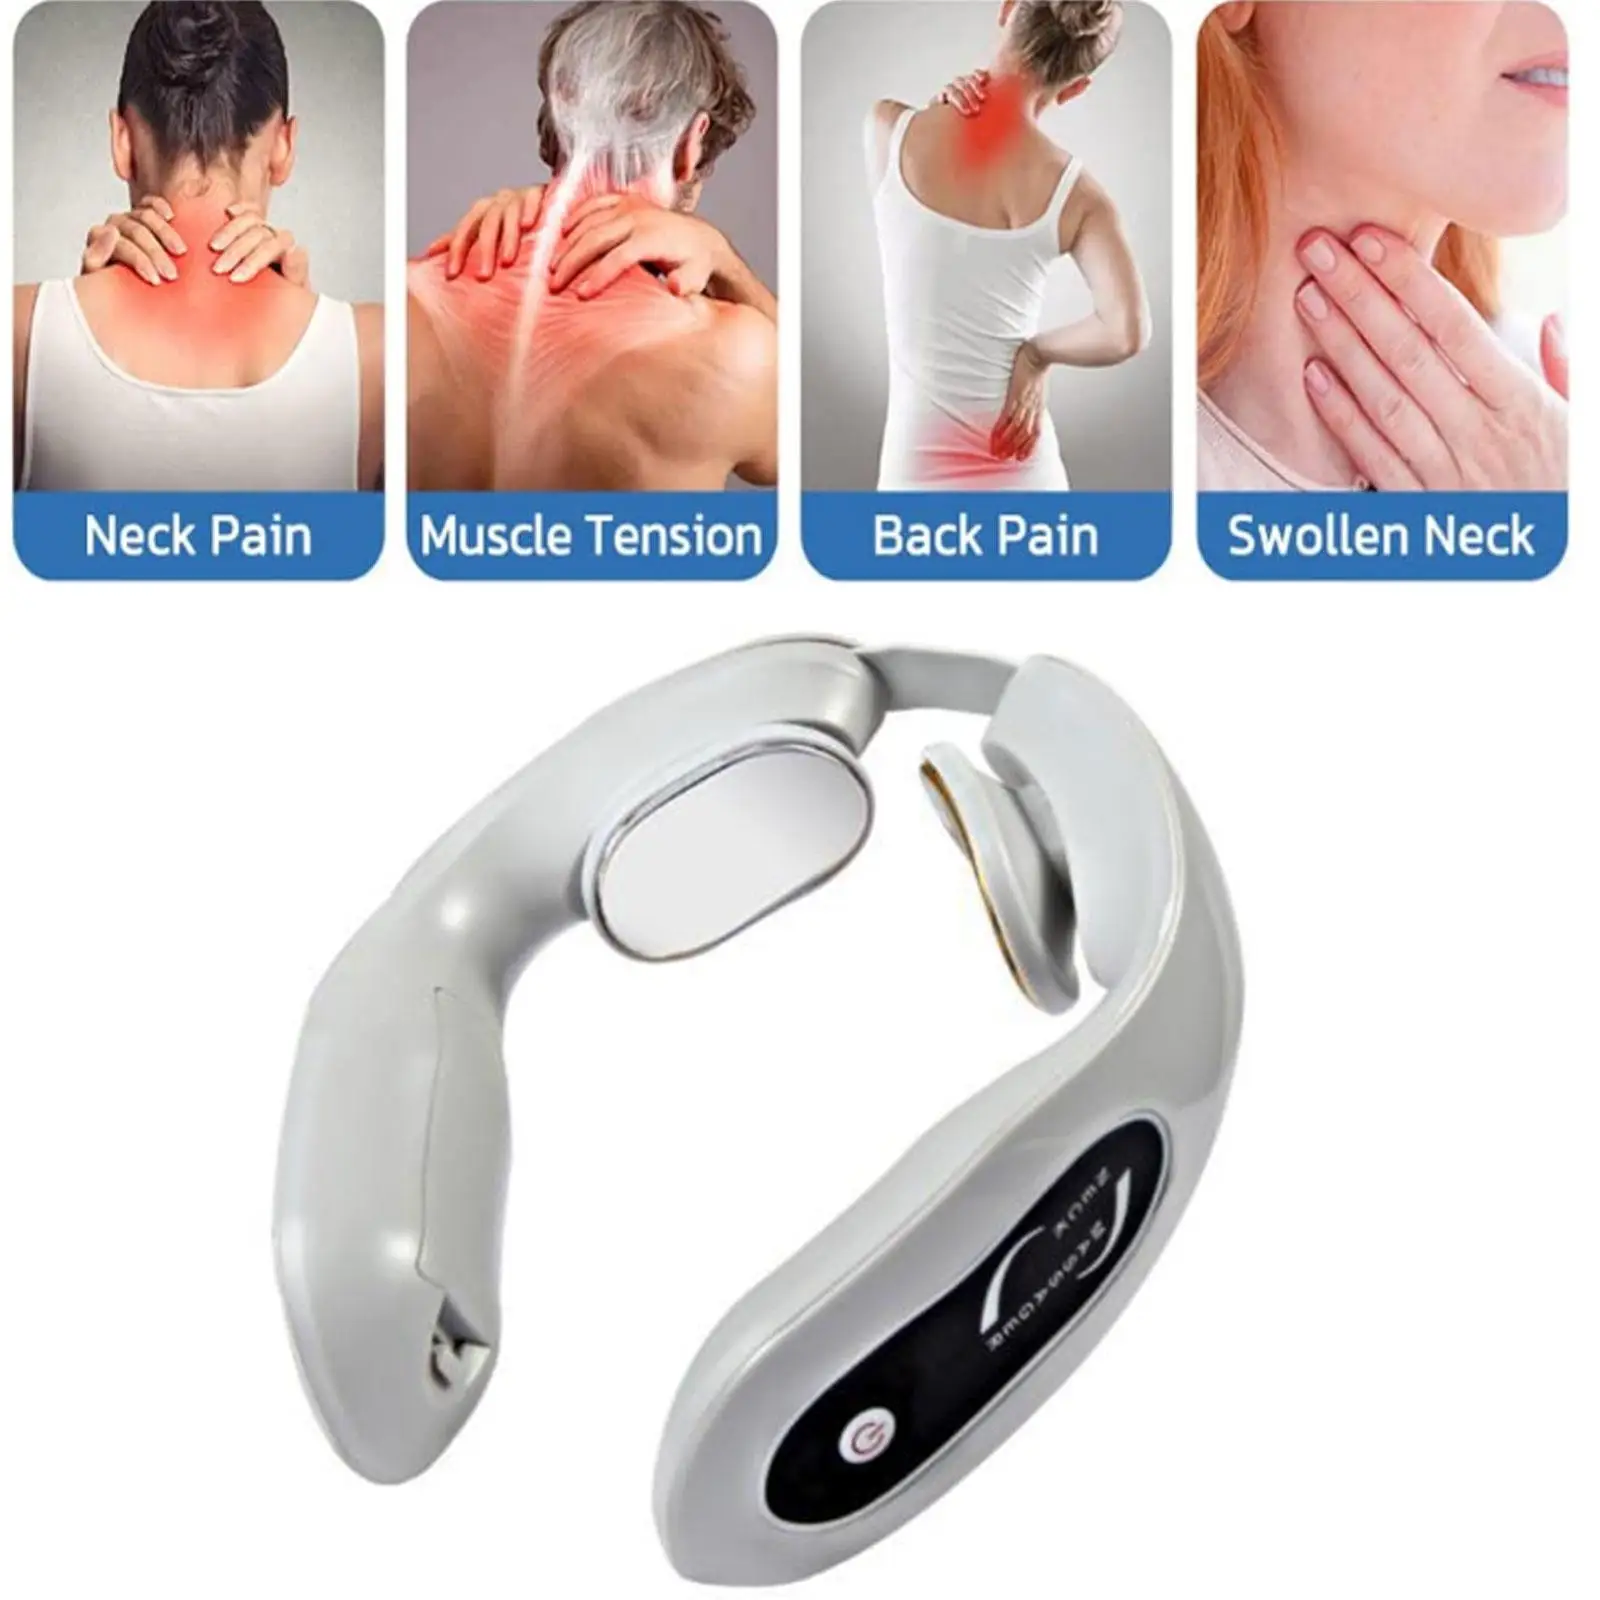 https://ae01.alicdn.com/kf/Se20cd83e59a84837ba8c7a68fe31db82d/Neck-Massager-Electric-Neck-Massage-Pain-Relief-Tool-Health-Care-Relaxation-Cervical-Vertebra-Physiotherapy.jpg